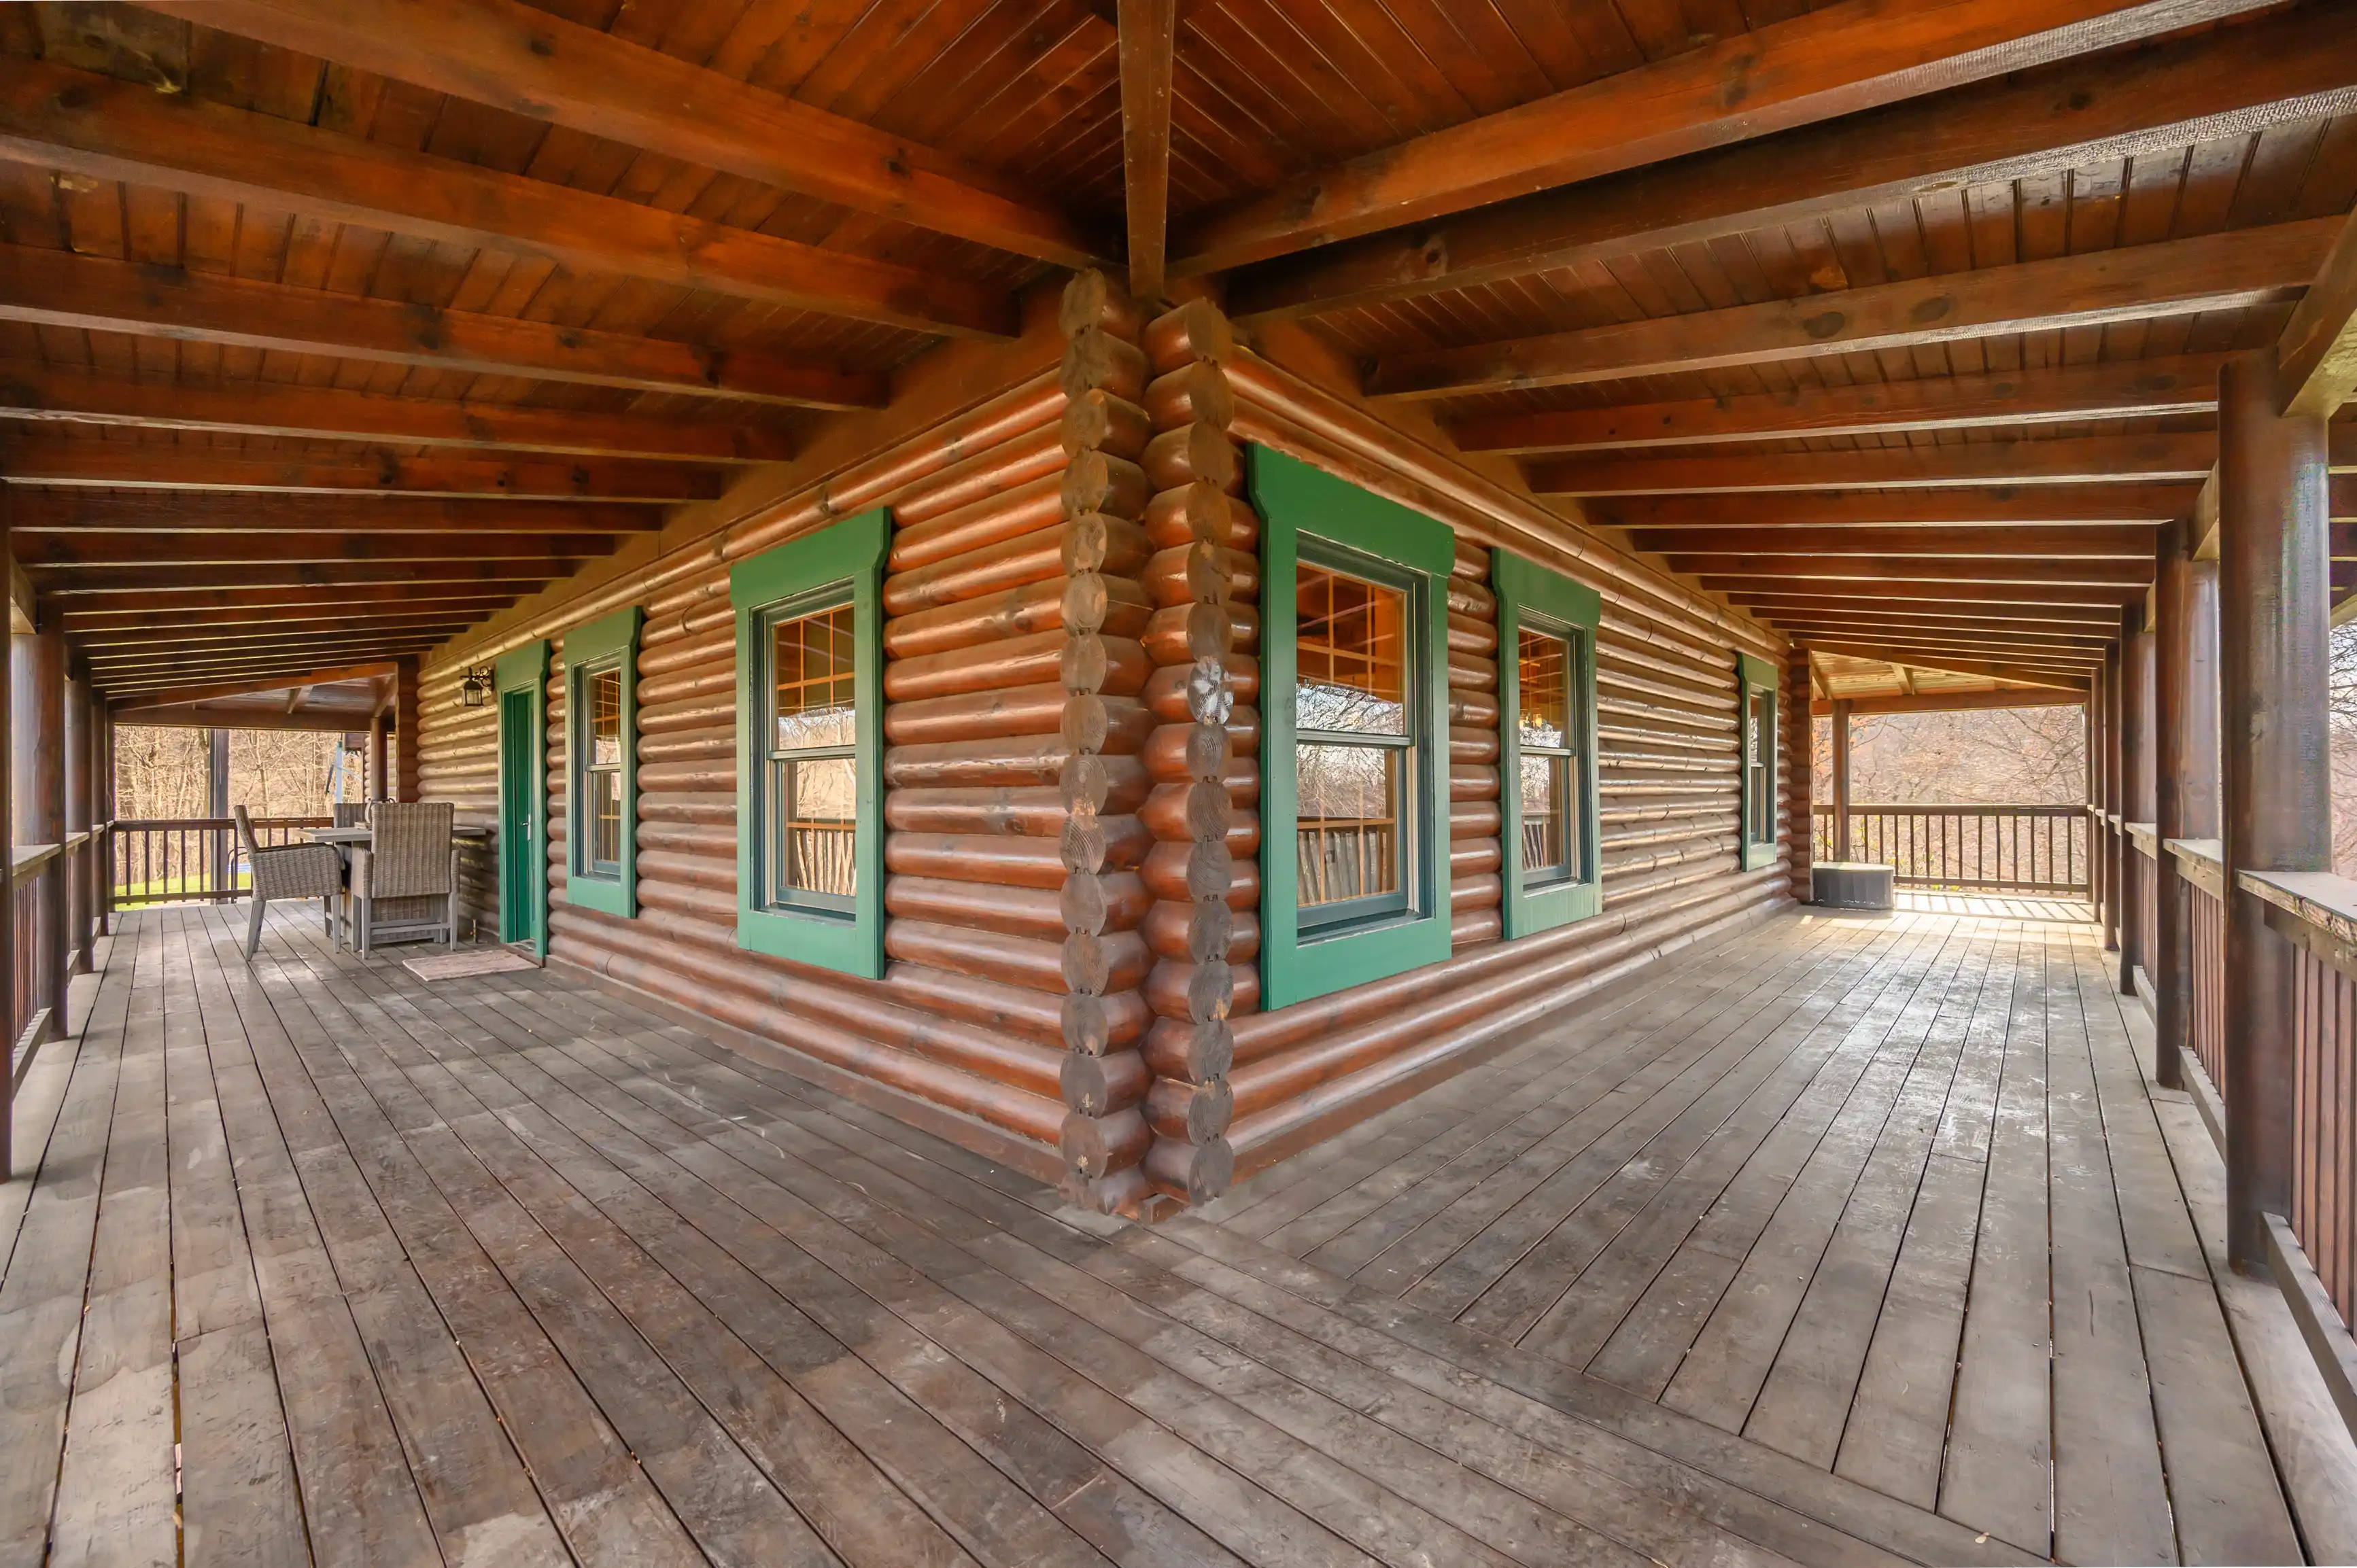 Spacious wooden porch of a log cabin with green-trimmed windows and outdoor furniture overlooking a forested area.